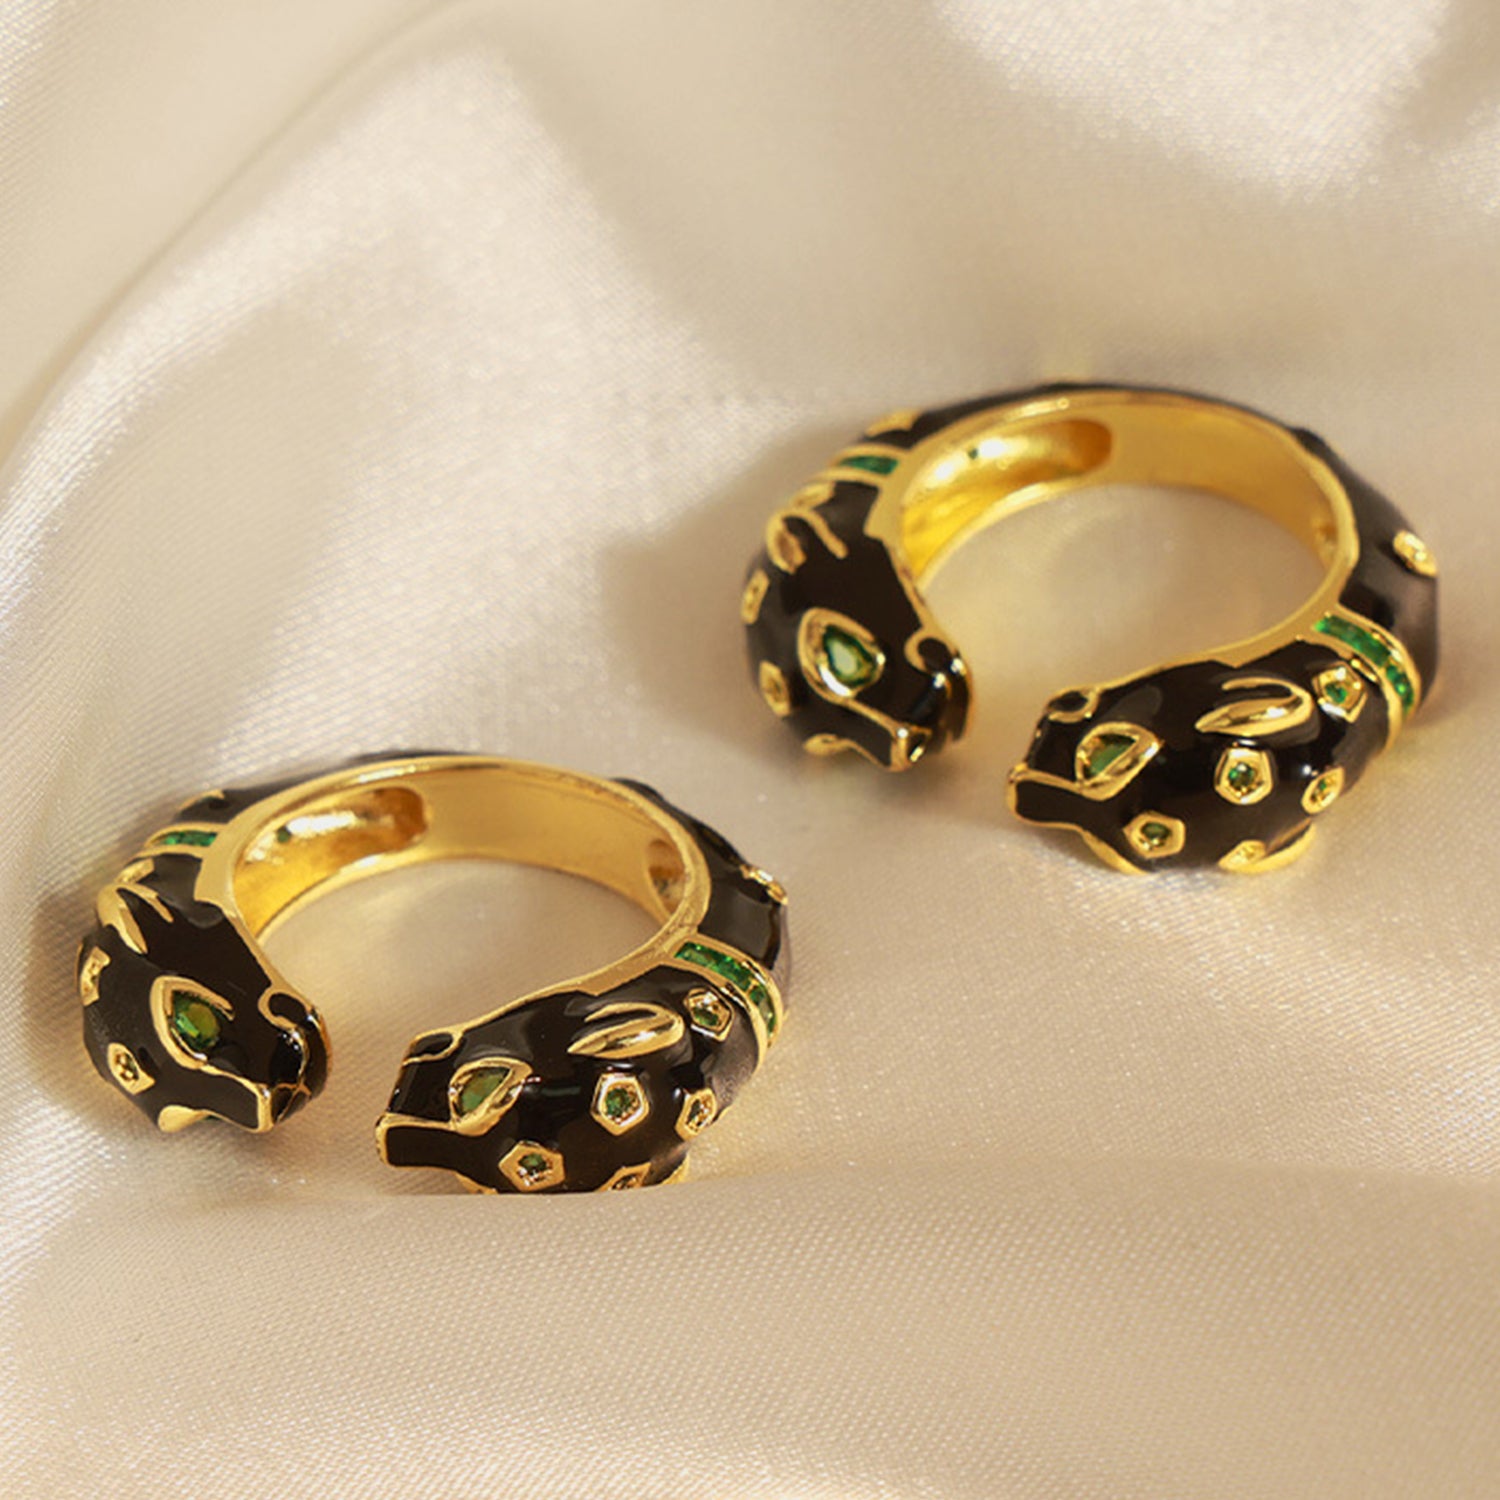 A close-up of a hand with a golden zircon ring shaped like a stylized panther head, featuring black detailing and small gemstone accents that add a touch of luxury and boldness to the jewelry piece. The ring is worn on the middle finger, complementing an elegant and sophisticated style.